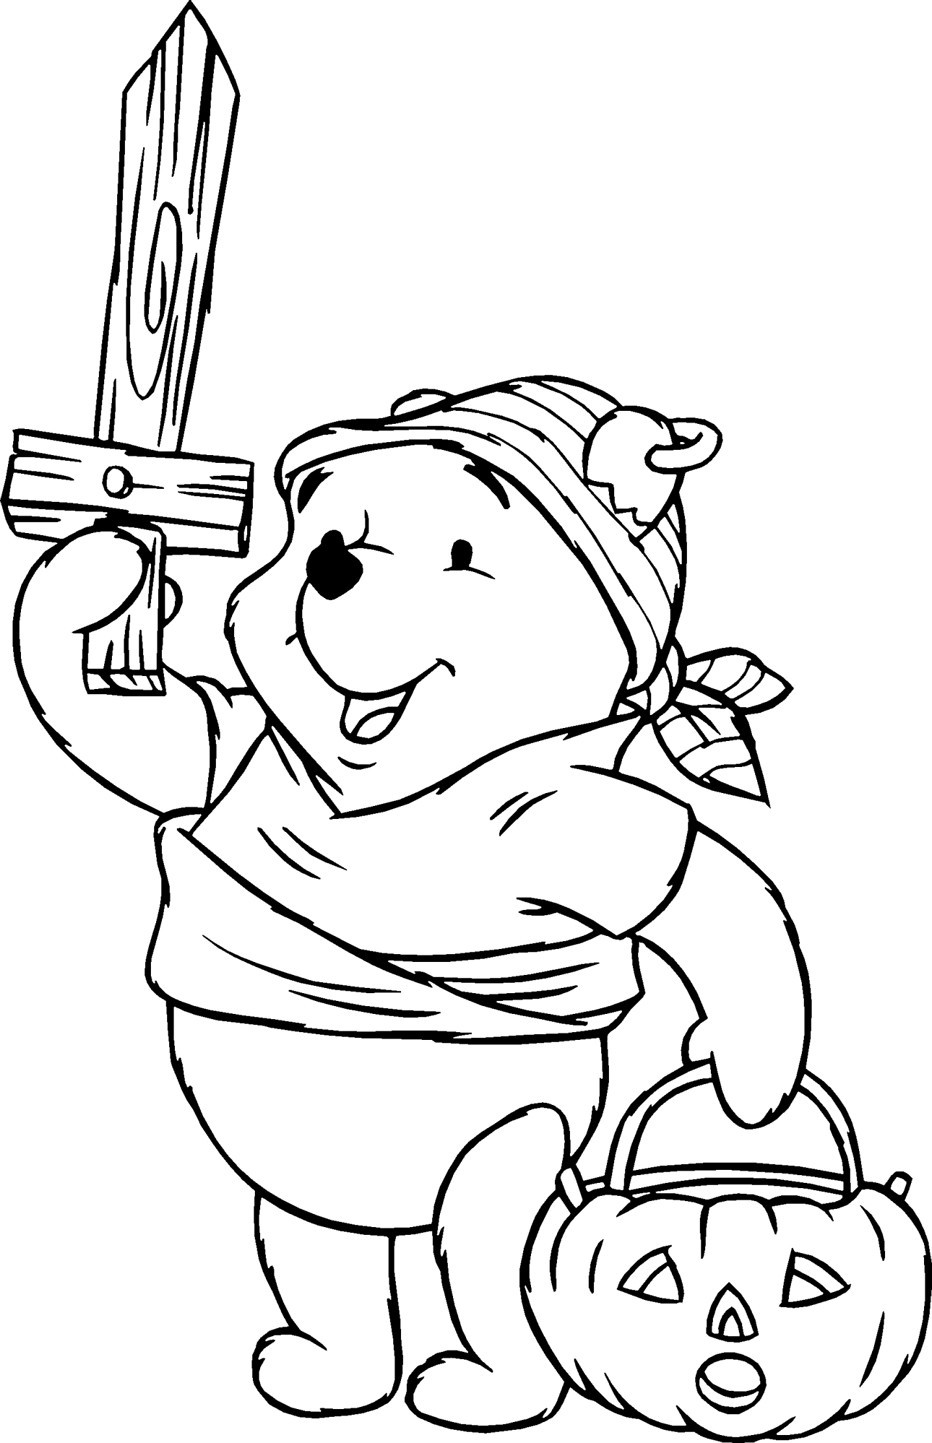 Free Coloring For Kids
 24 Free Printable Halloween Coloring Pages for Kids